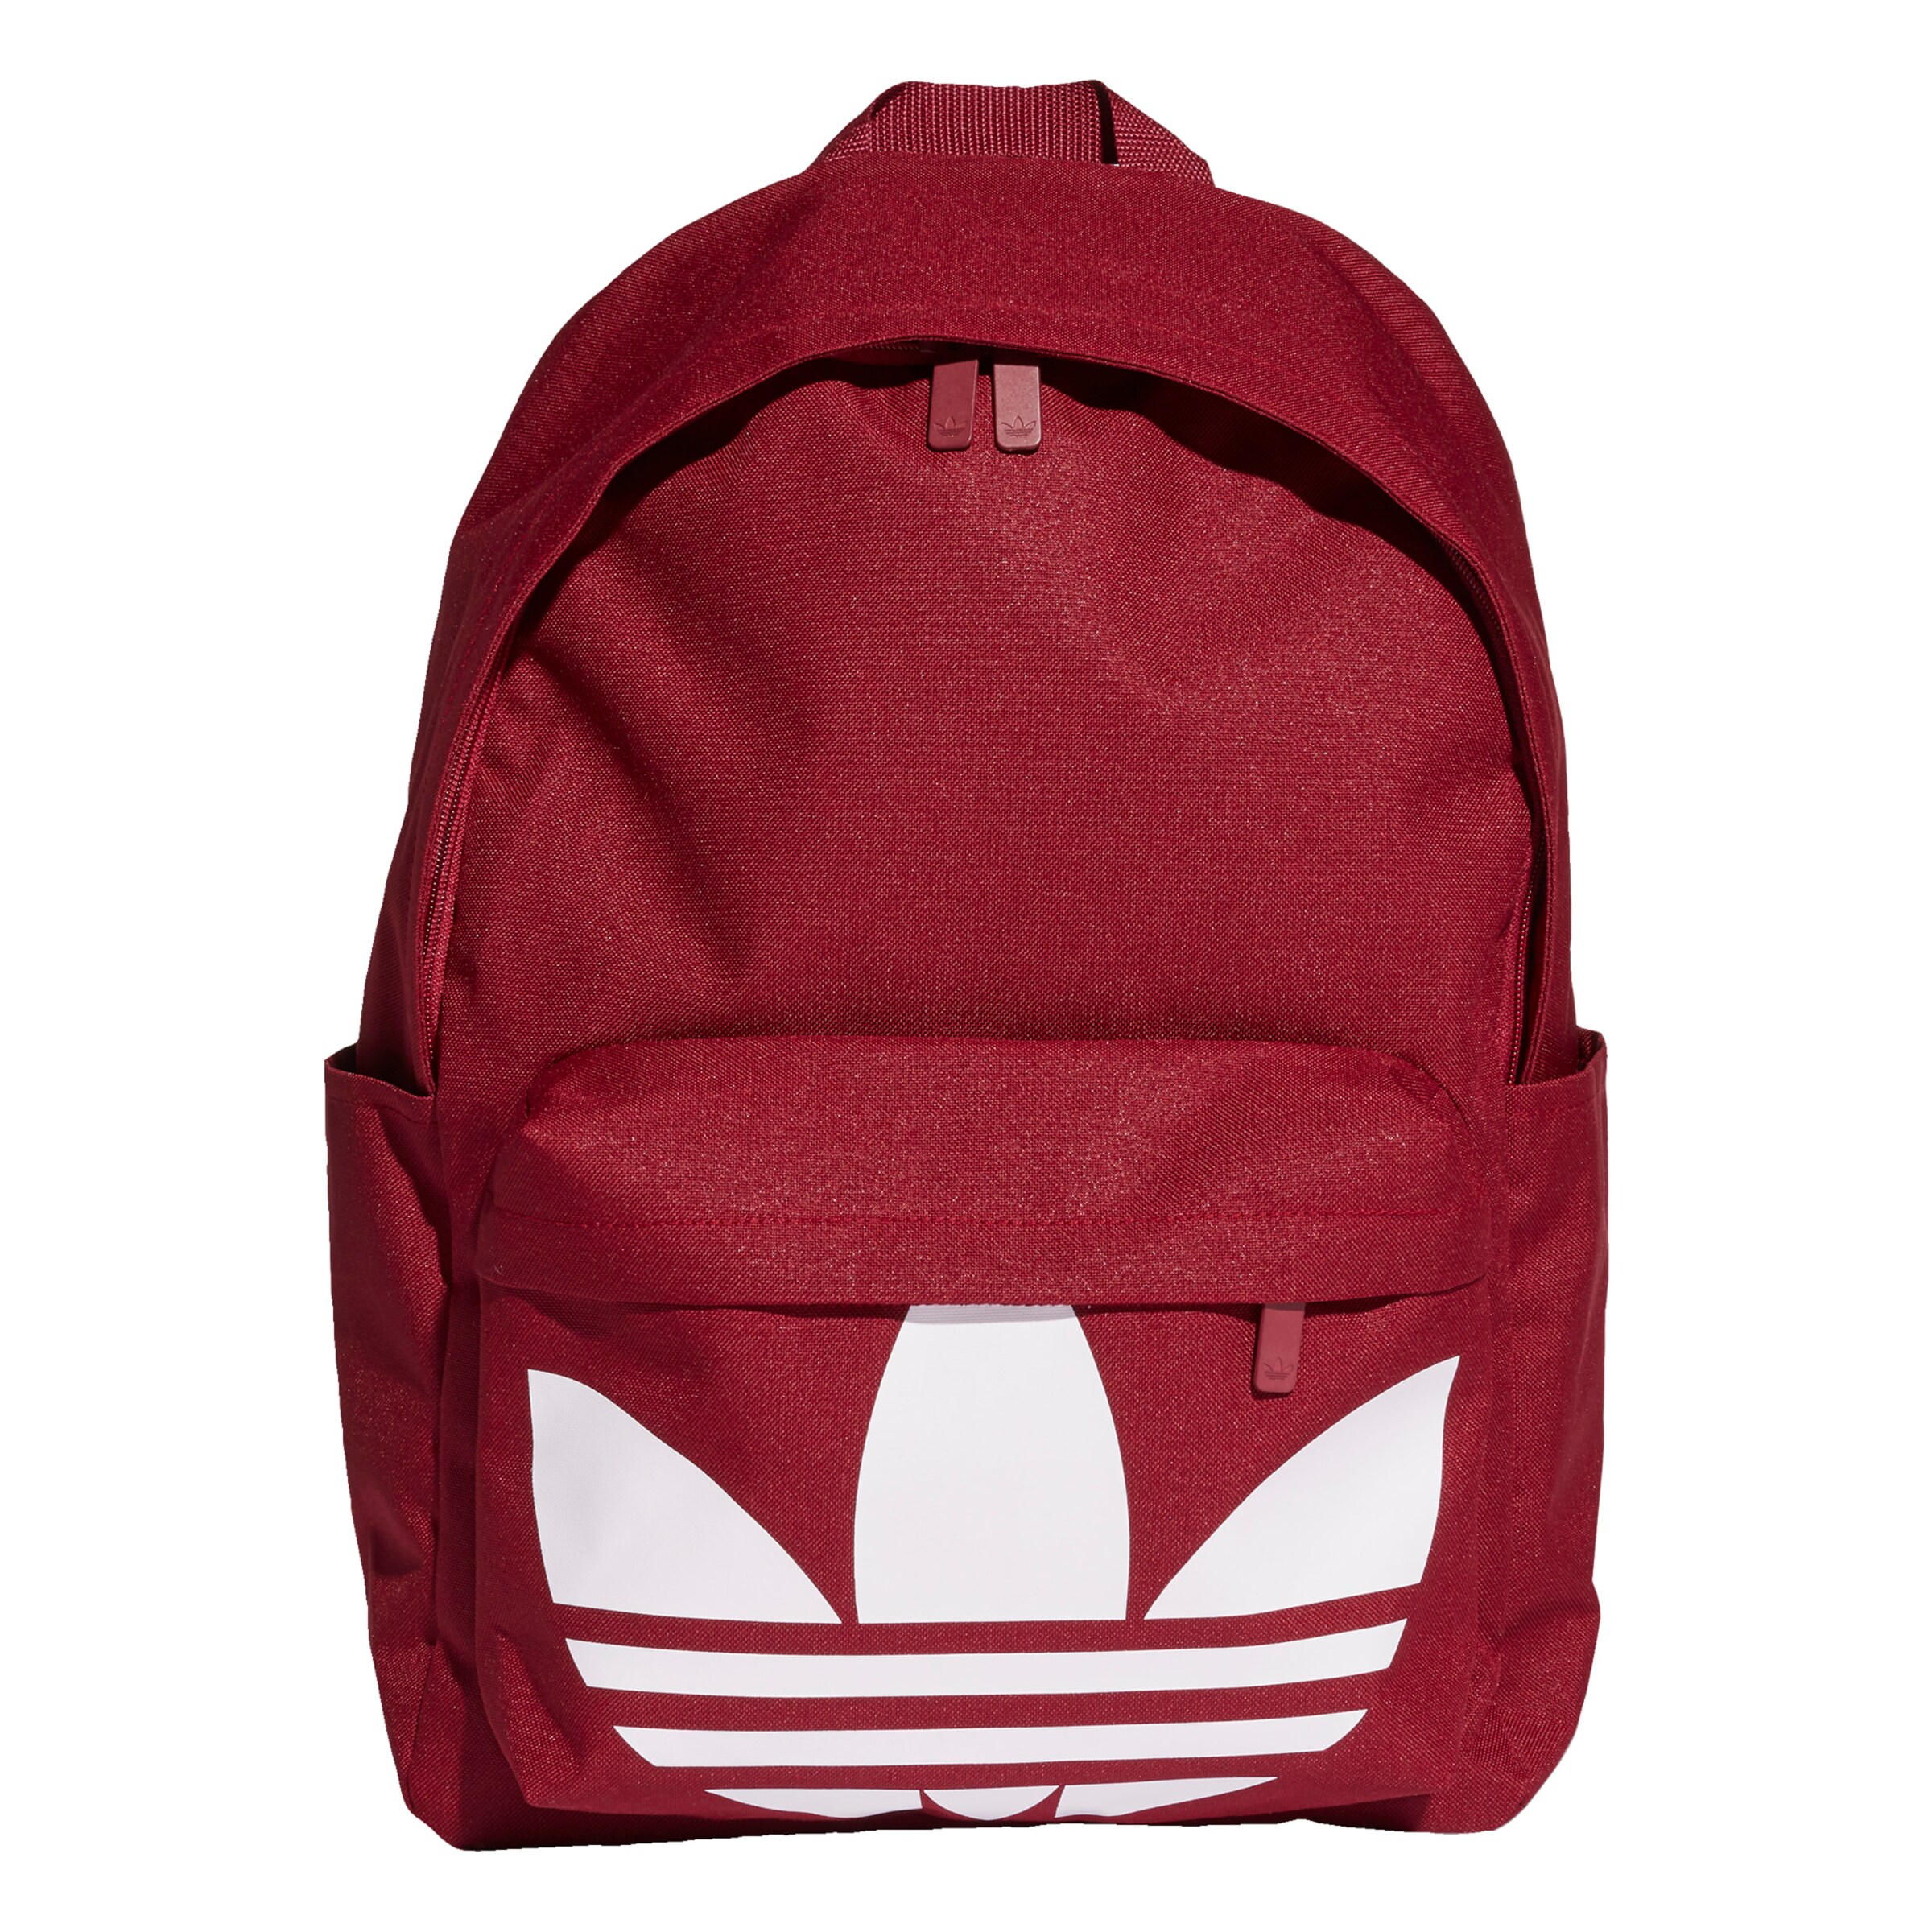 red and white adidas backpack